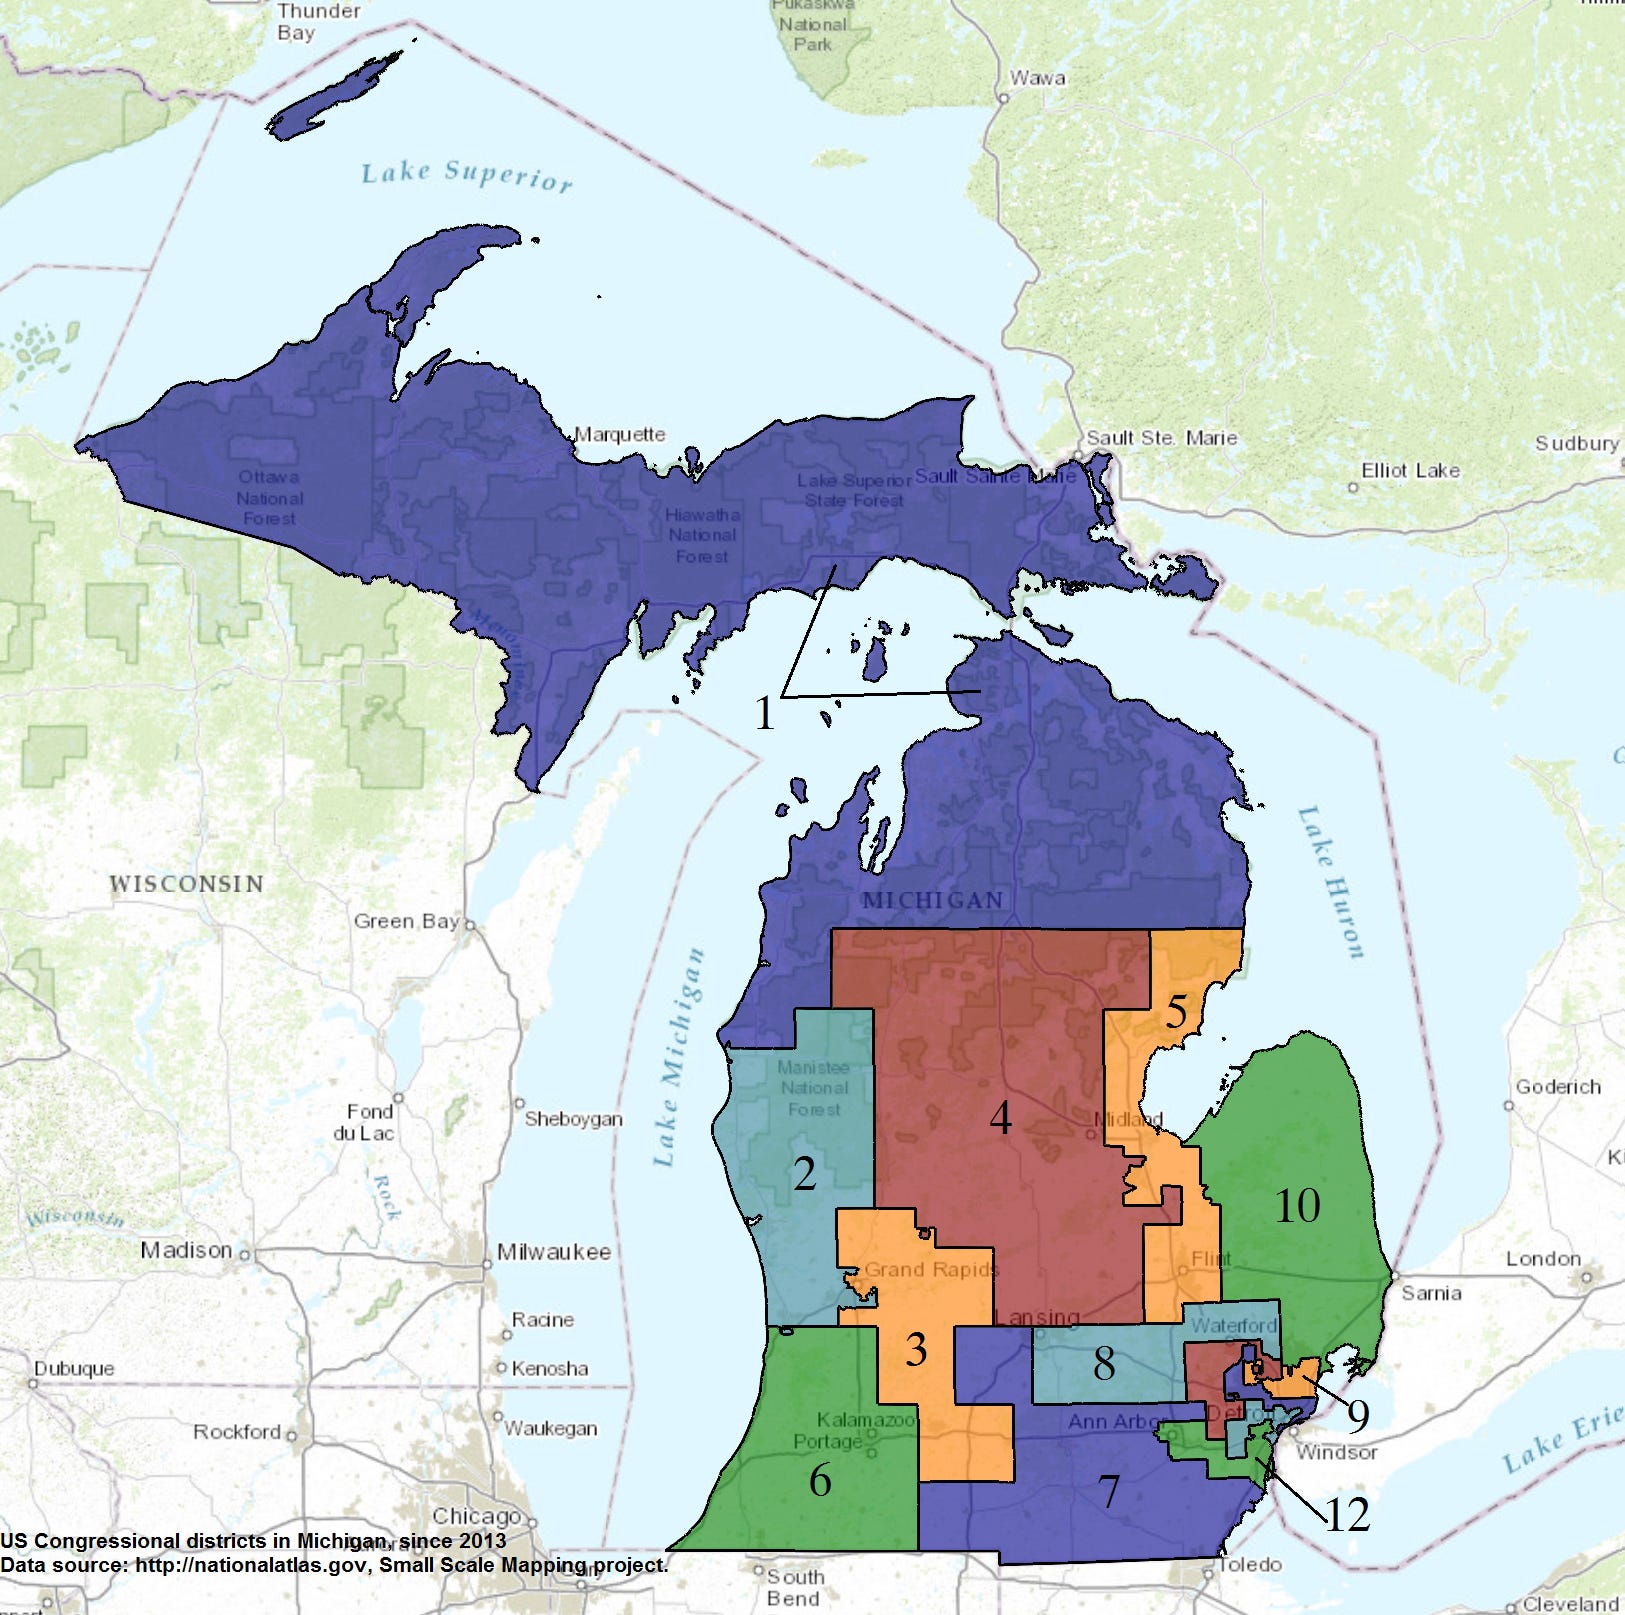 Map shows boundaries of Michigan's congressional districts since 2013.